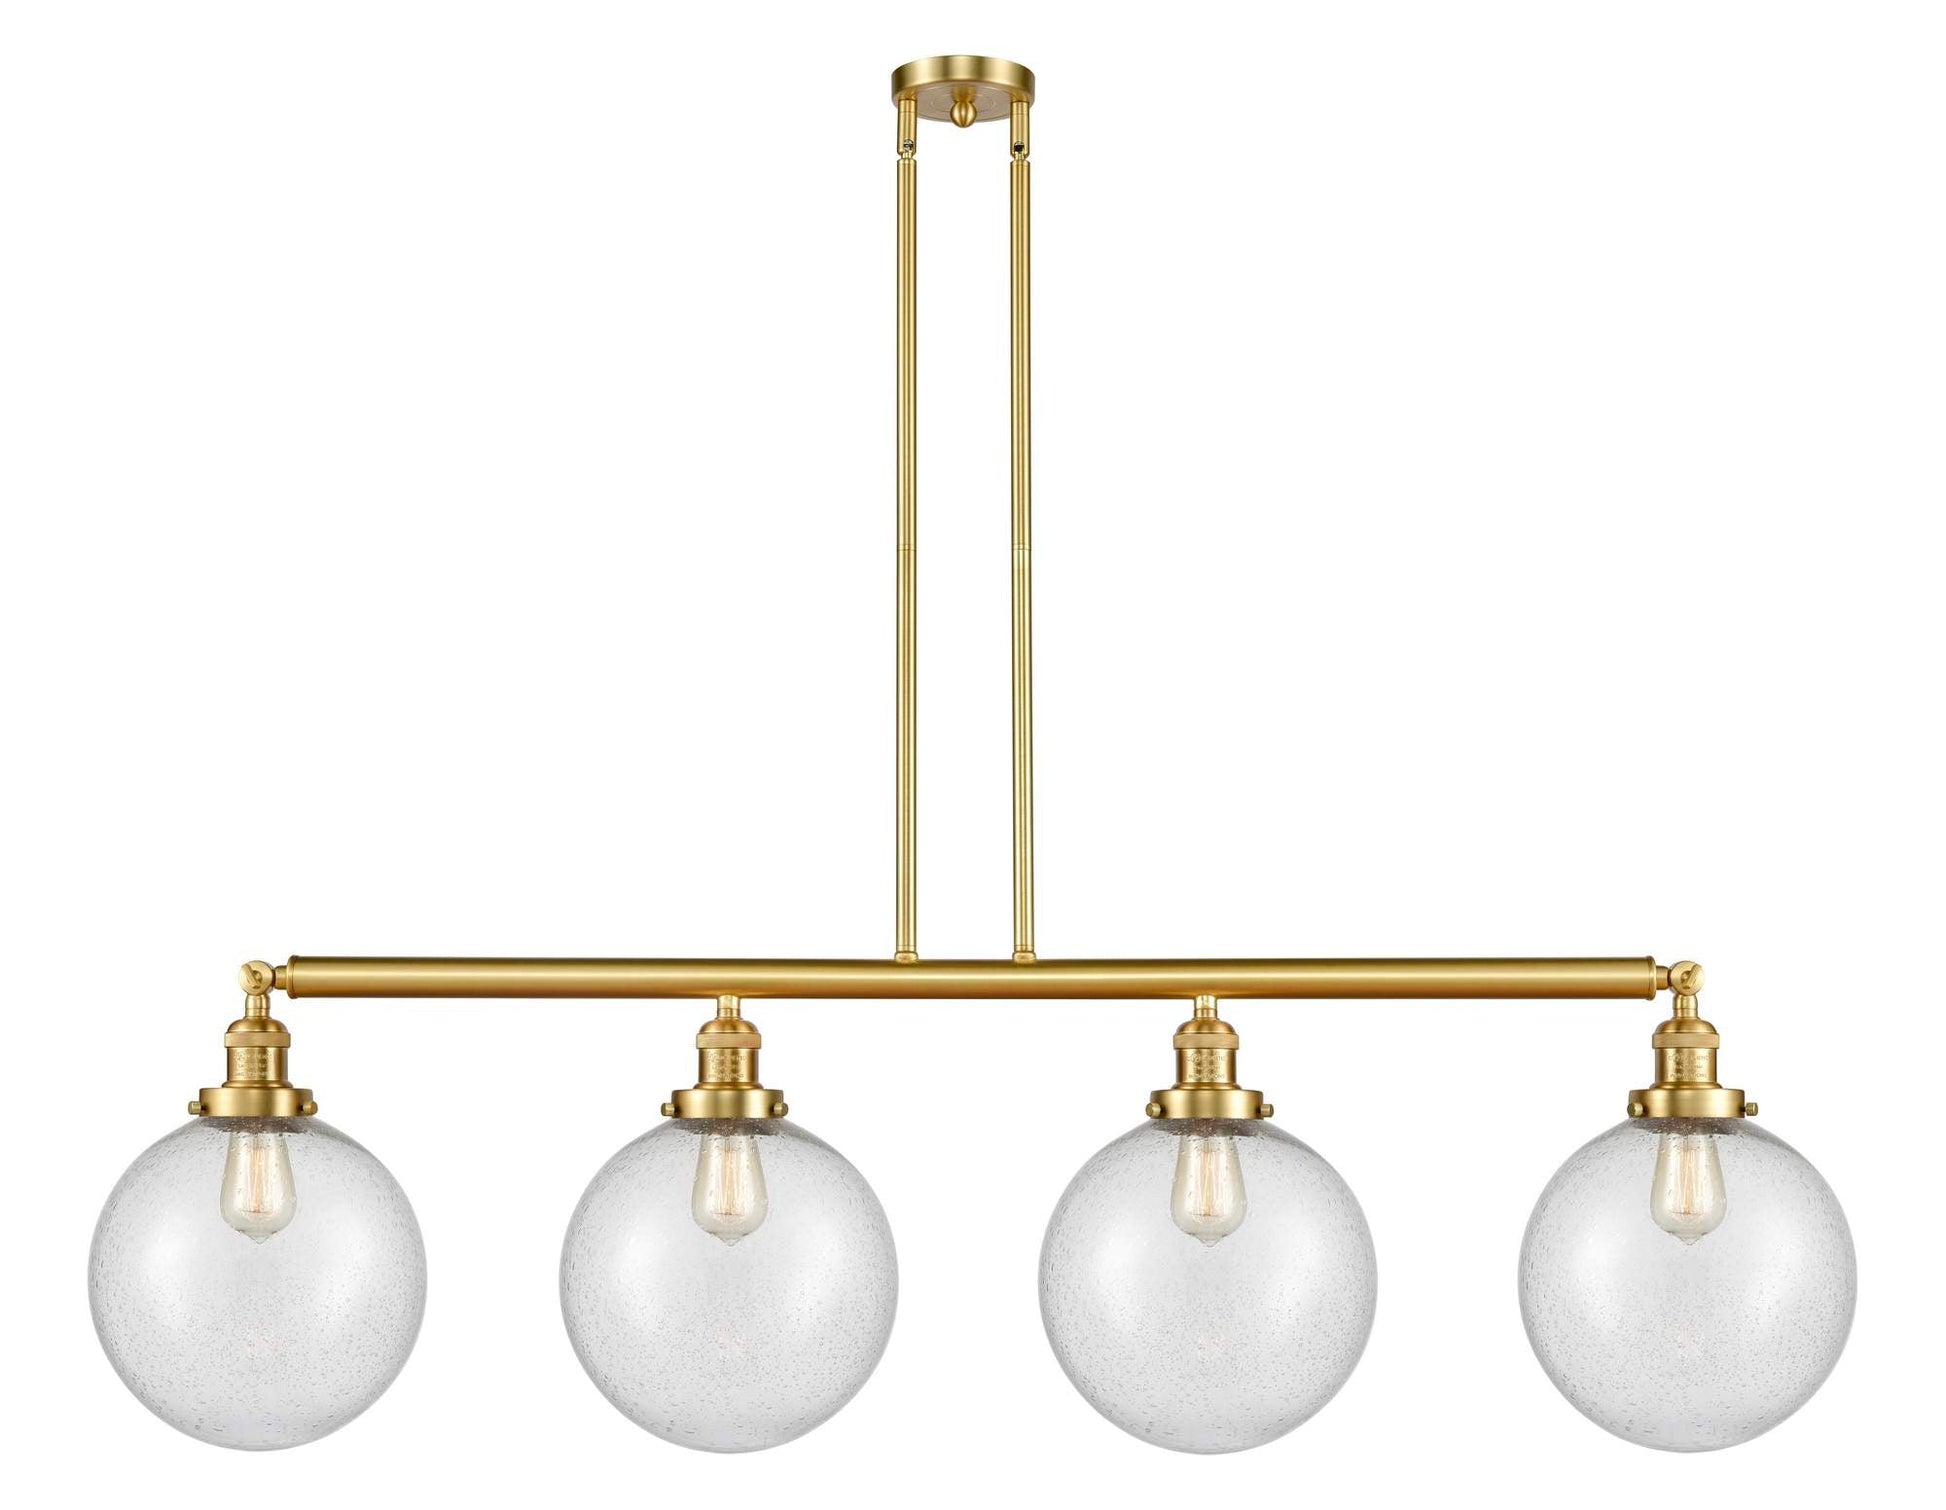 214-SG-G204-10 4-Light 54" Satin Gold Island Light - Seedy Beacon Glass - LED Bulb - Dimmensions: 54 x 10 x 14<br>Minimum Height : 24<br>Maximum Height : 48 - Sloped Ceiling Compatible: Yes